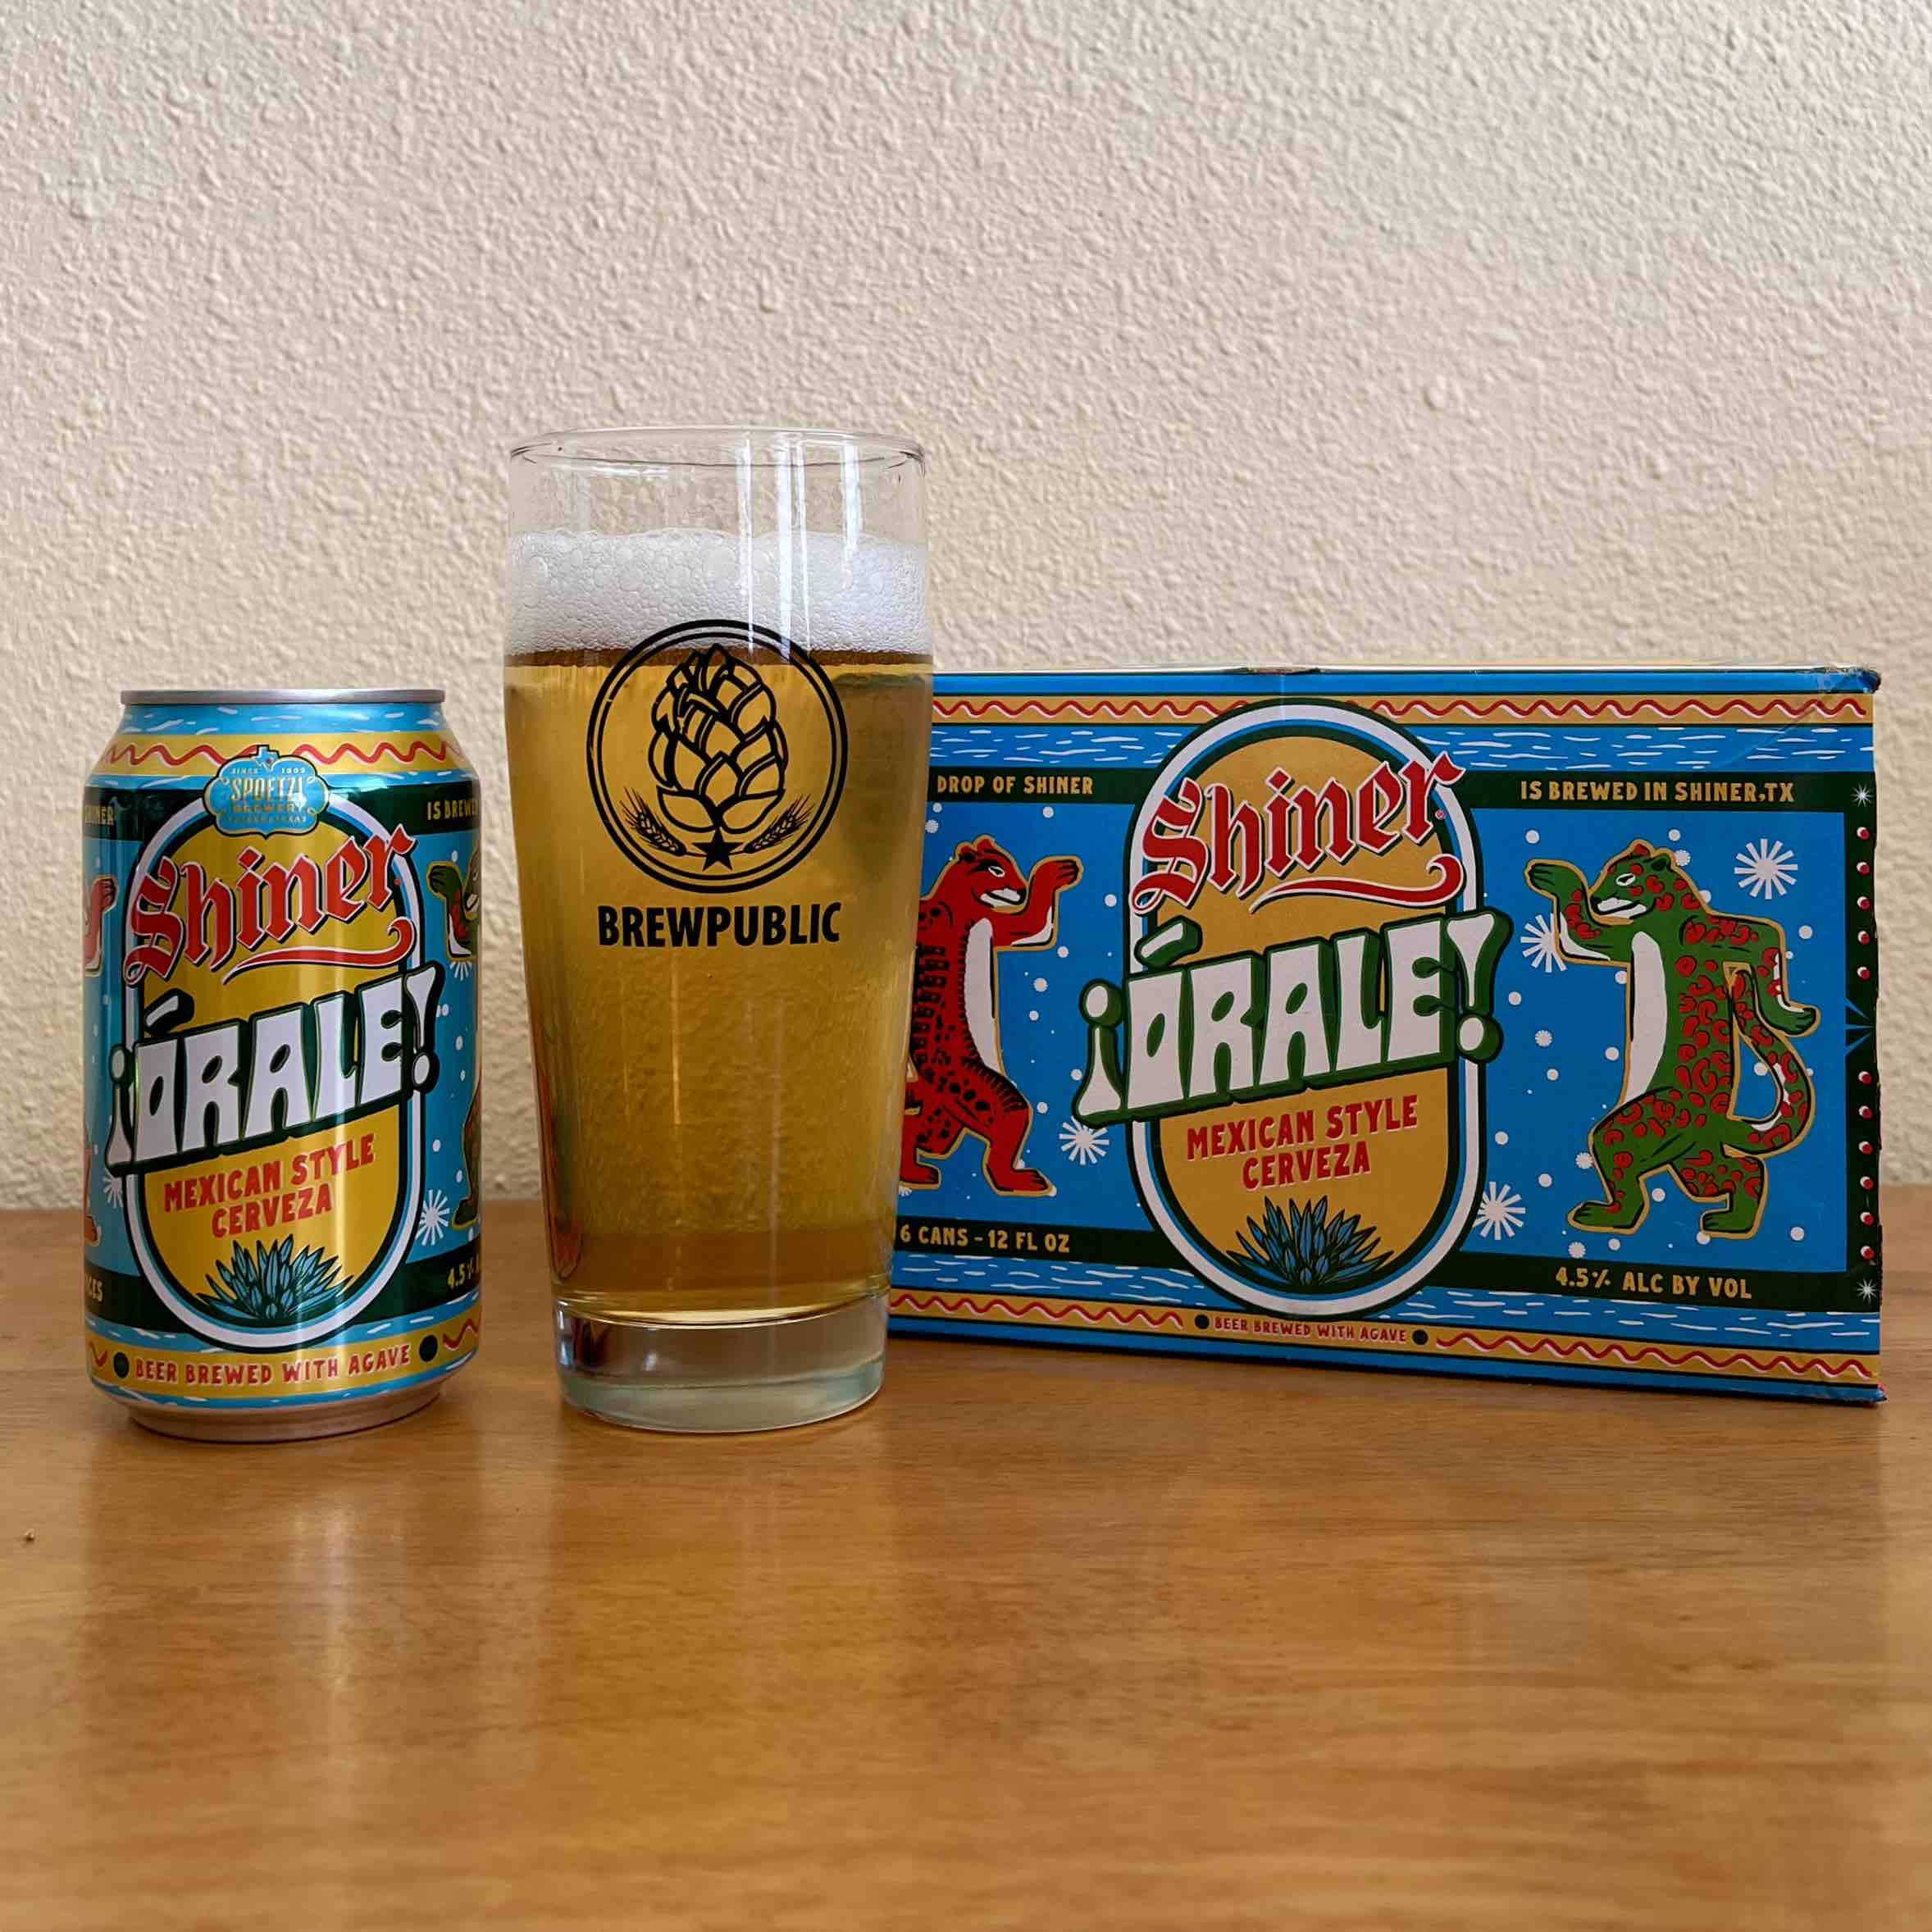 Shiner Beers introduces ¡Órale!, a Mexican-Style Lager brewed with agave.